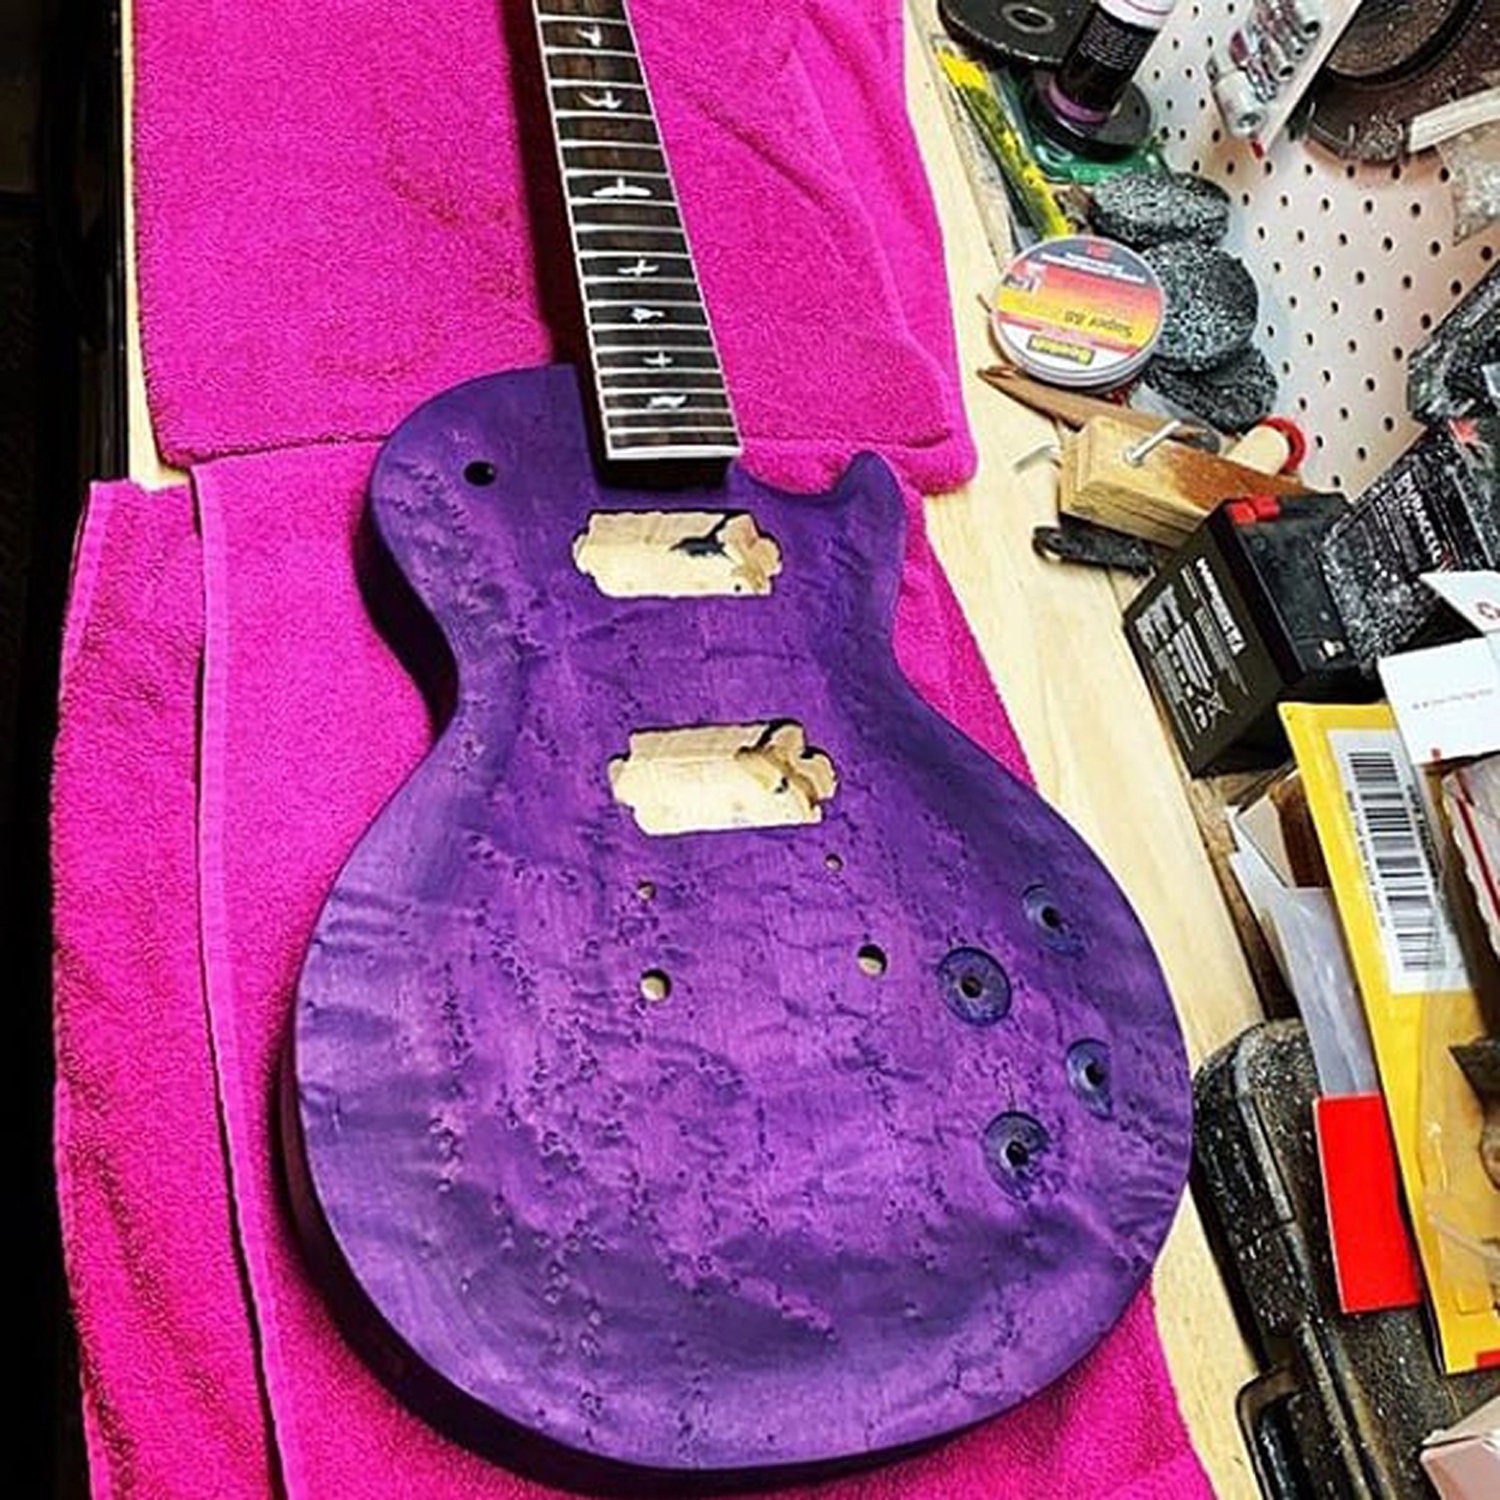 Keda Dye - Warmoth guitar build in progress. Colored wood is after dye  stain, but prior to seal coats. Wood coloring is done with Keda liquid dye  5 color kit mixed as